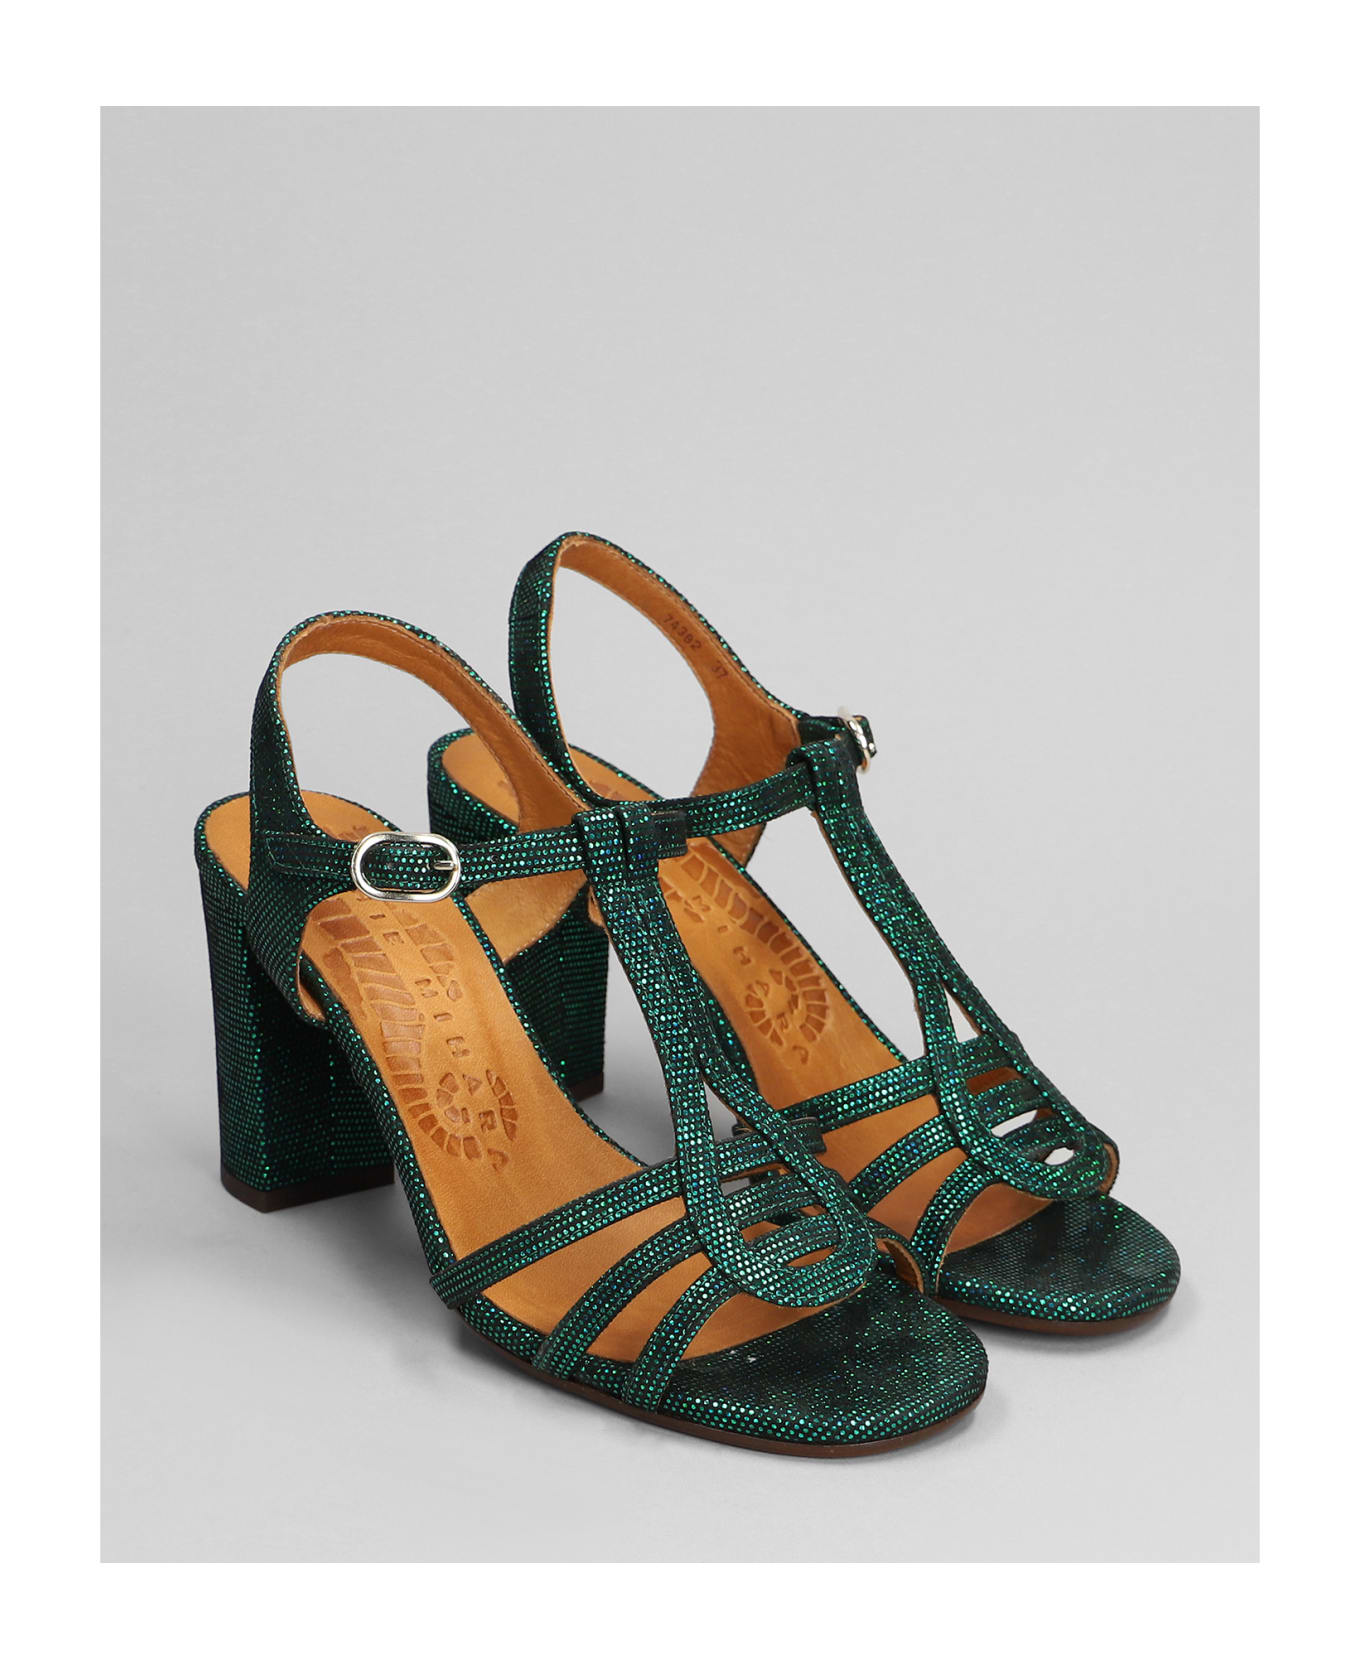 Chie Mihara Babi 44 Sandals In Green Leather - green サンダル